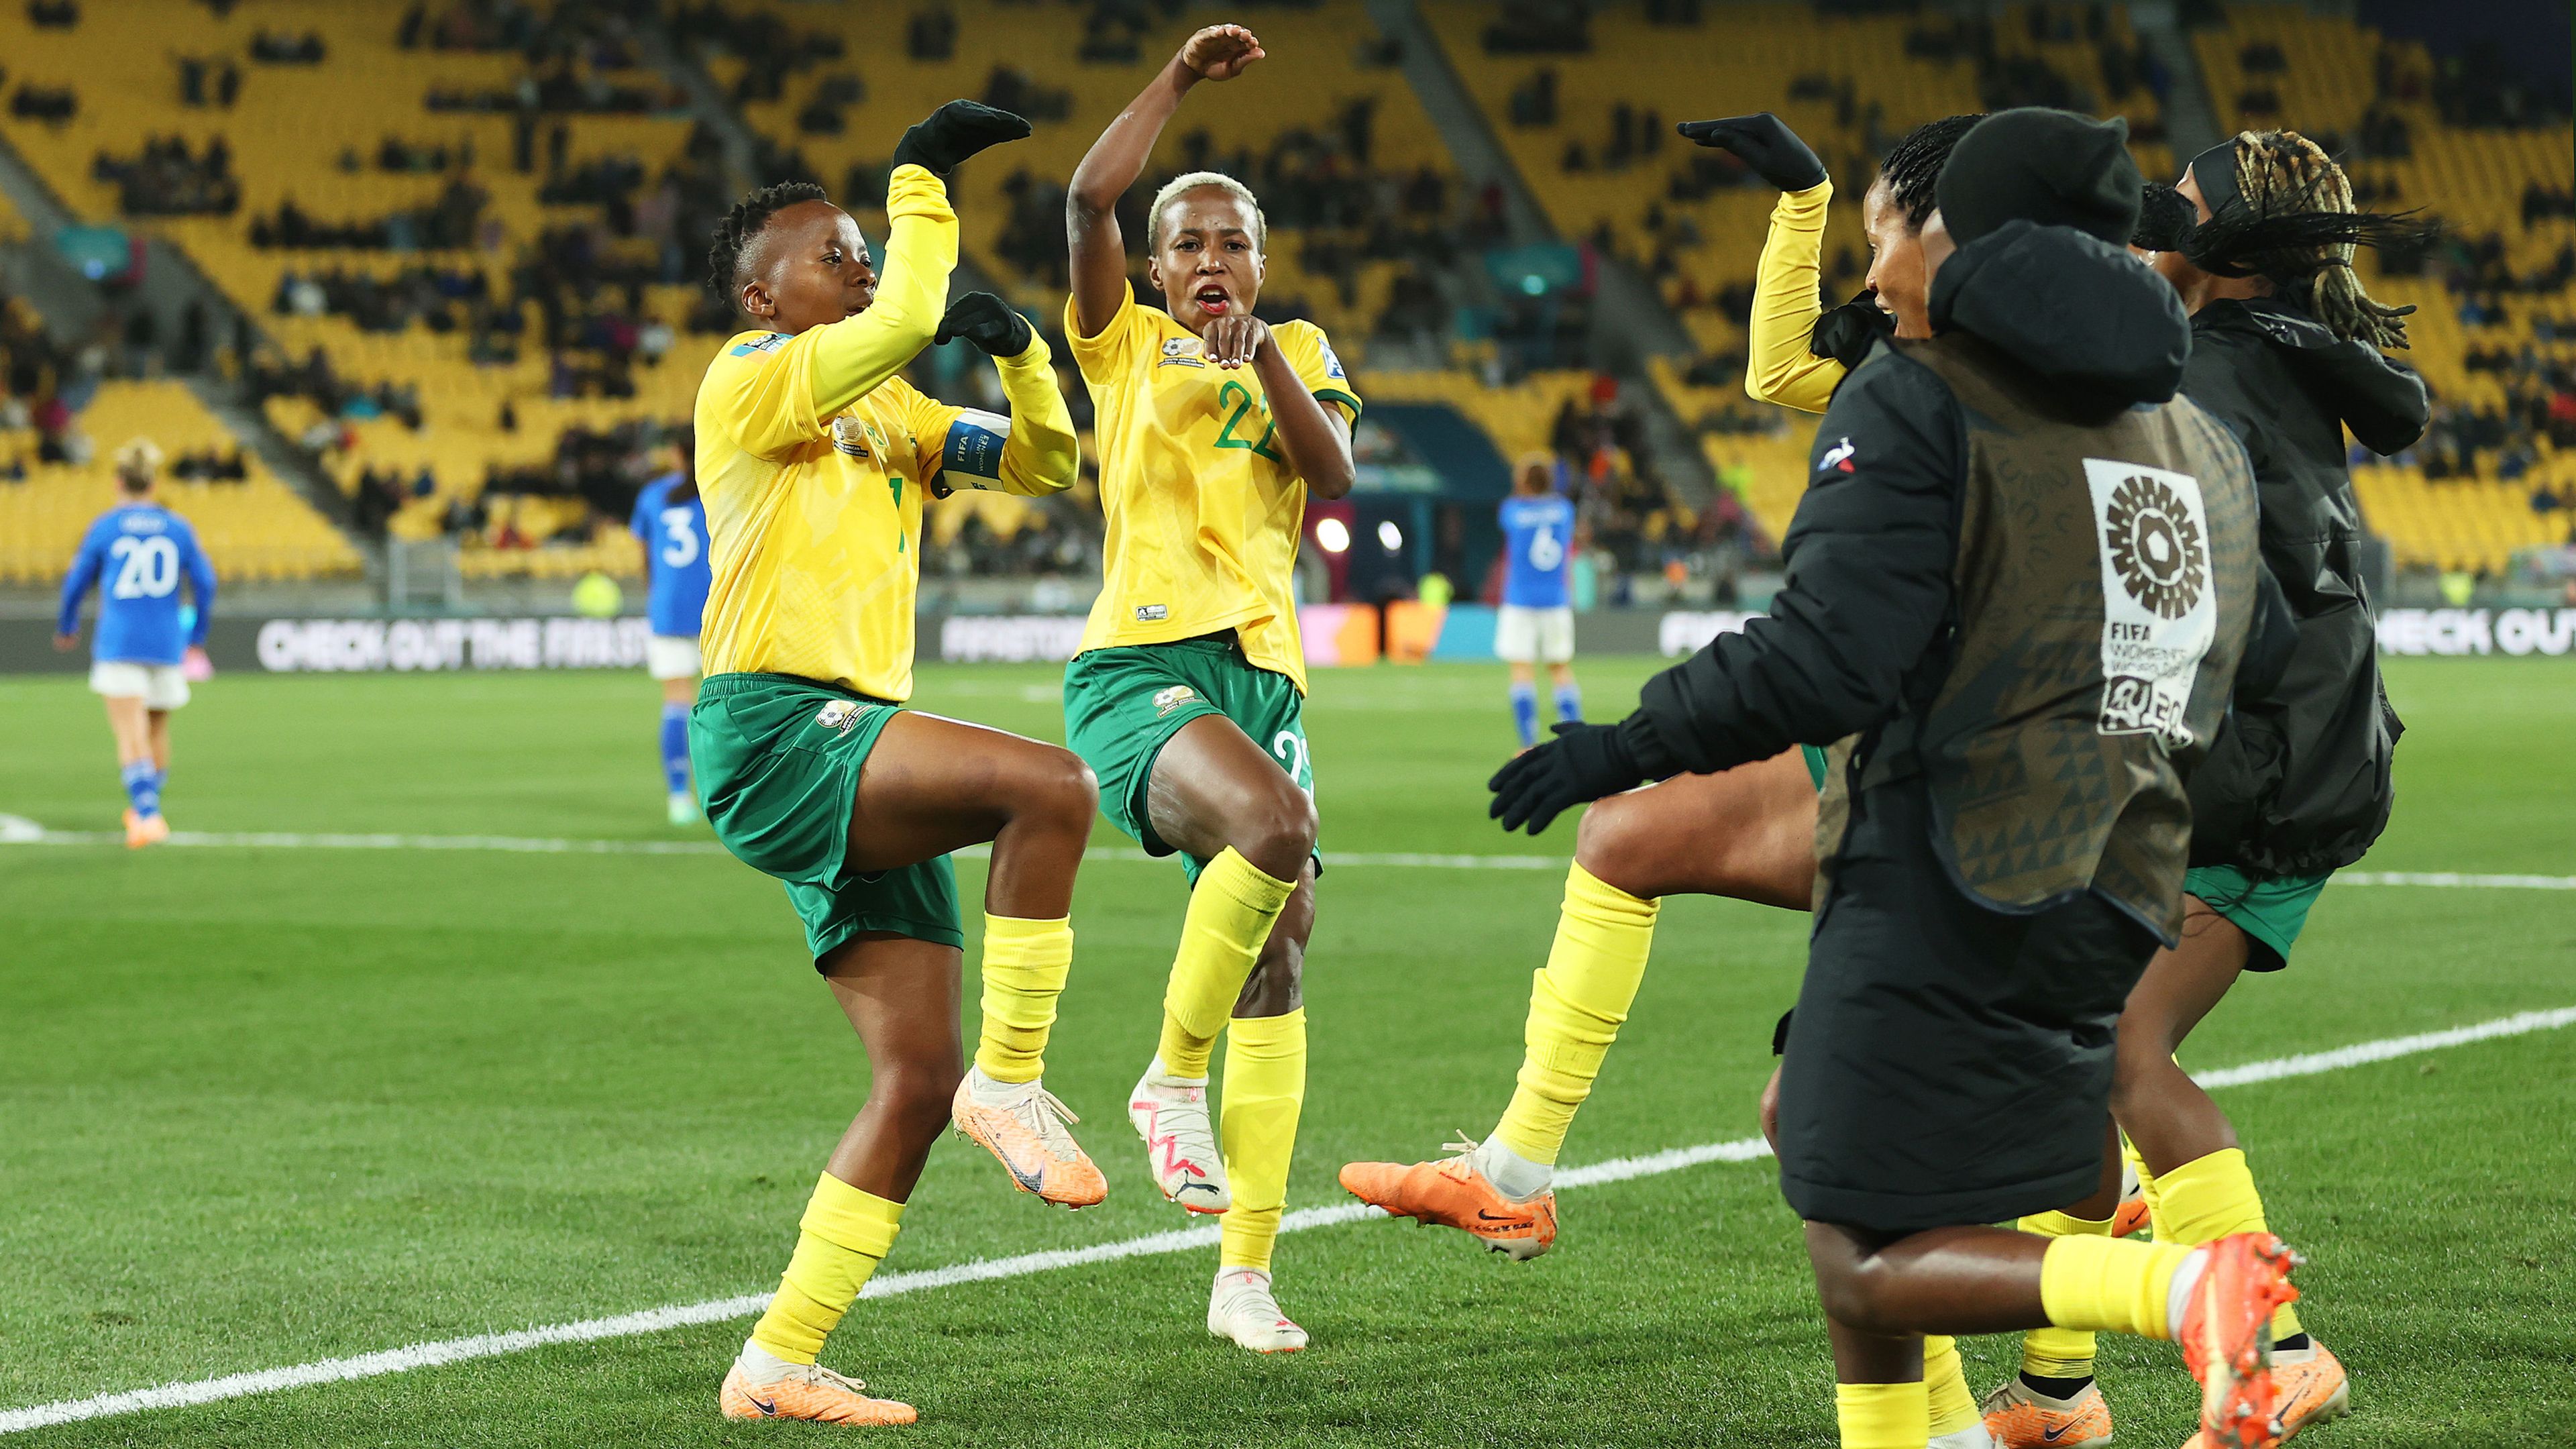 South Africa's first ever Women's World Cup win sends Italy crashing out of tournament